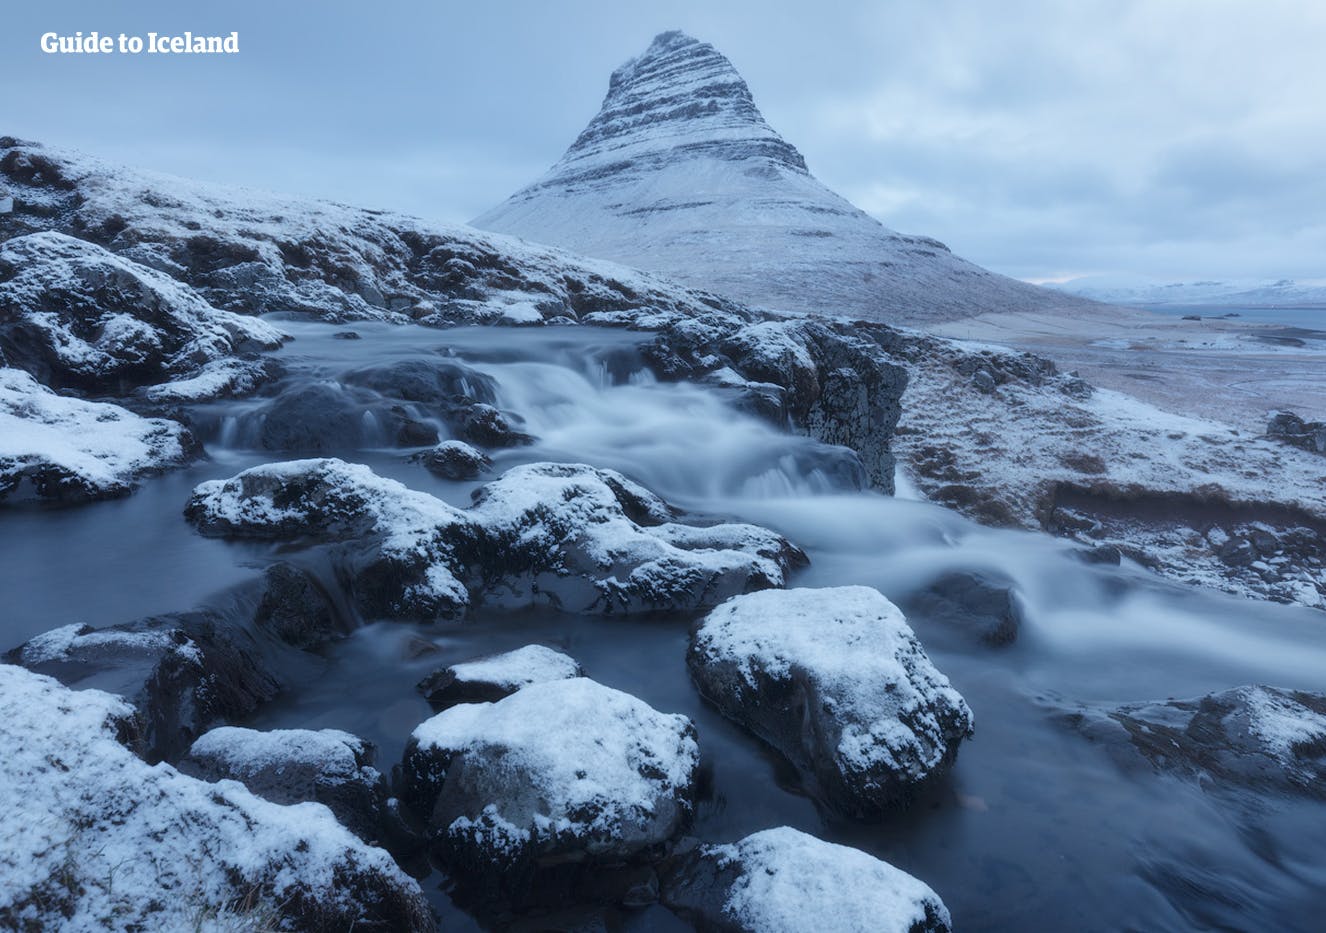 Kirkjufell in winter was used in Game of Thrones, as a location north of the Wall.